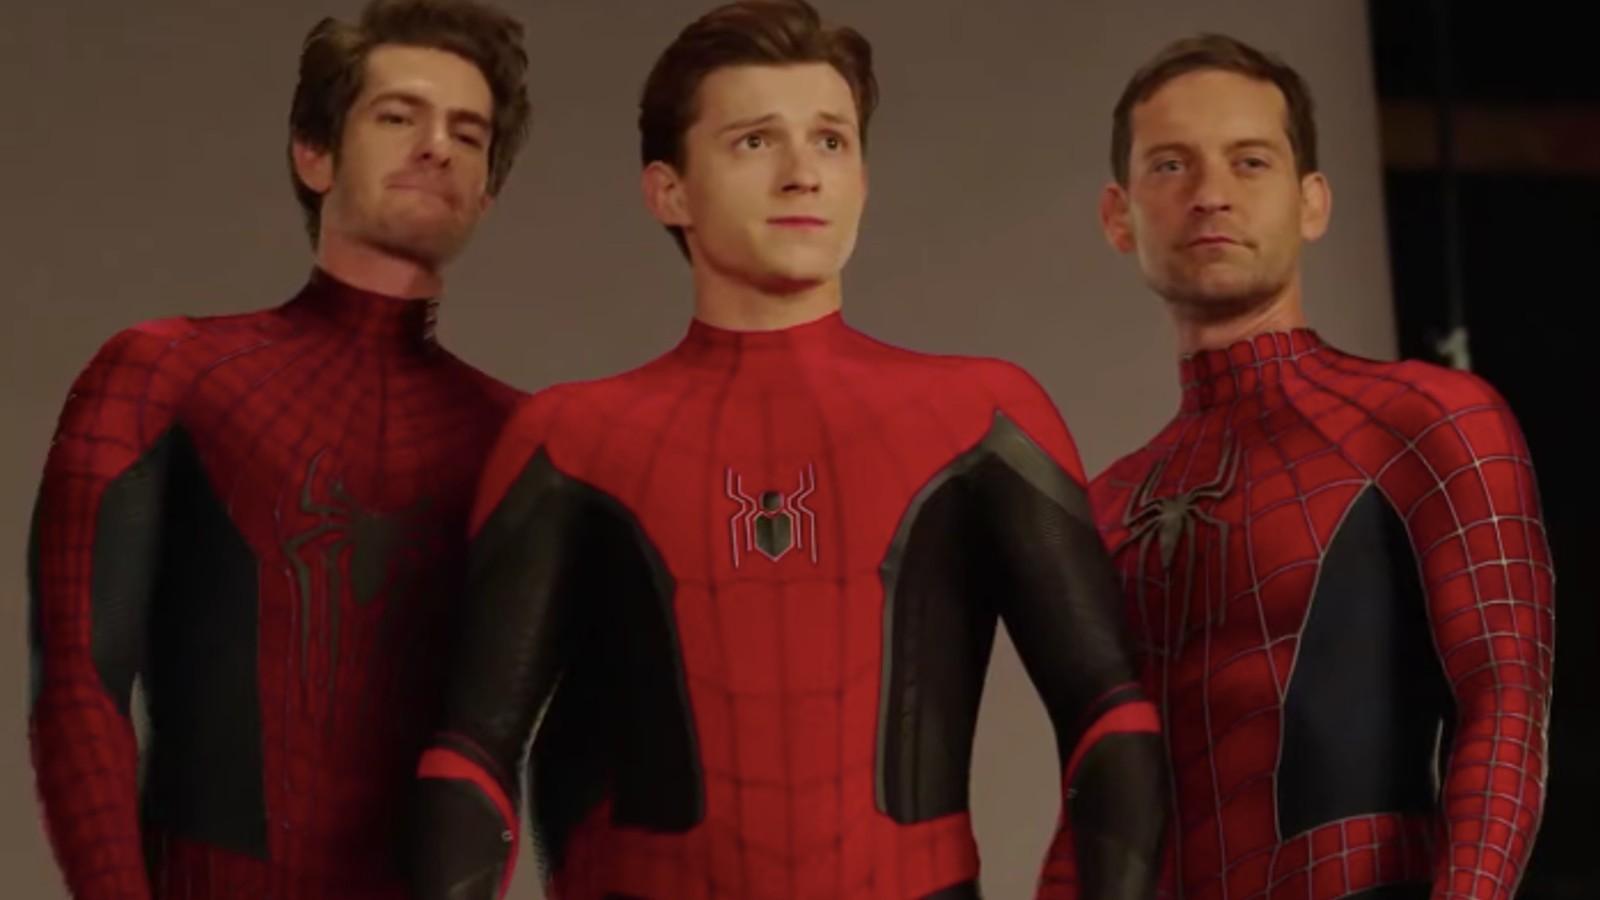 Andrew Garfield, Tobey McGuire, and Tom Holland as Spider-Man